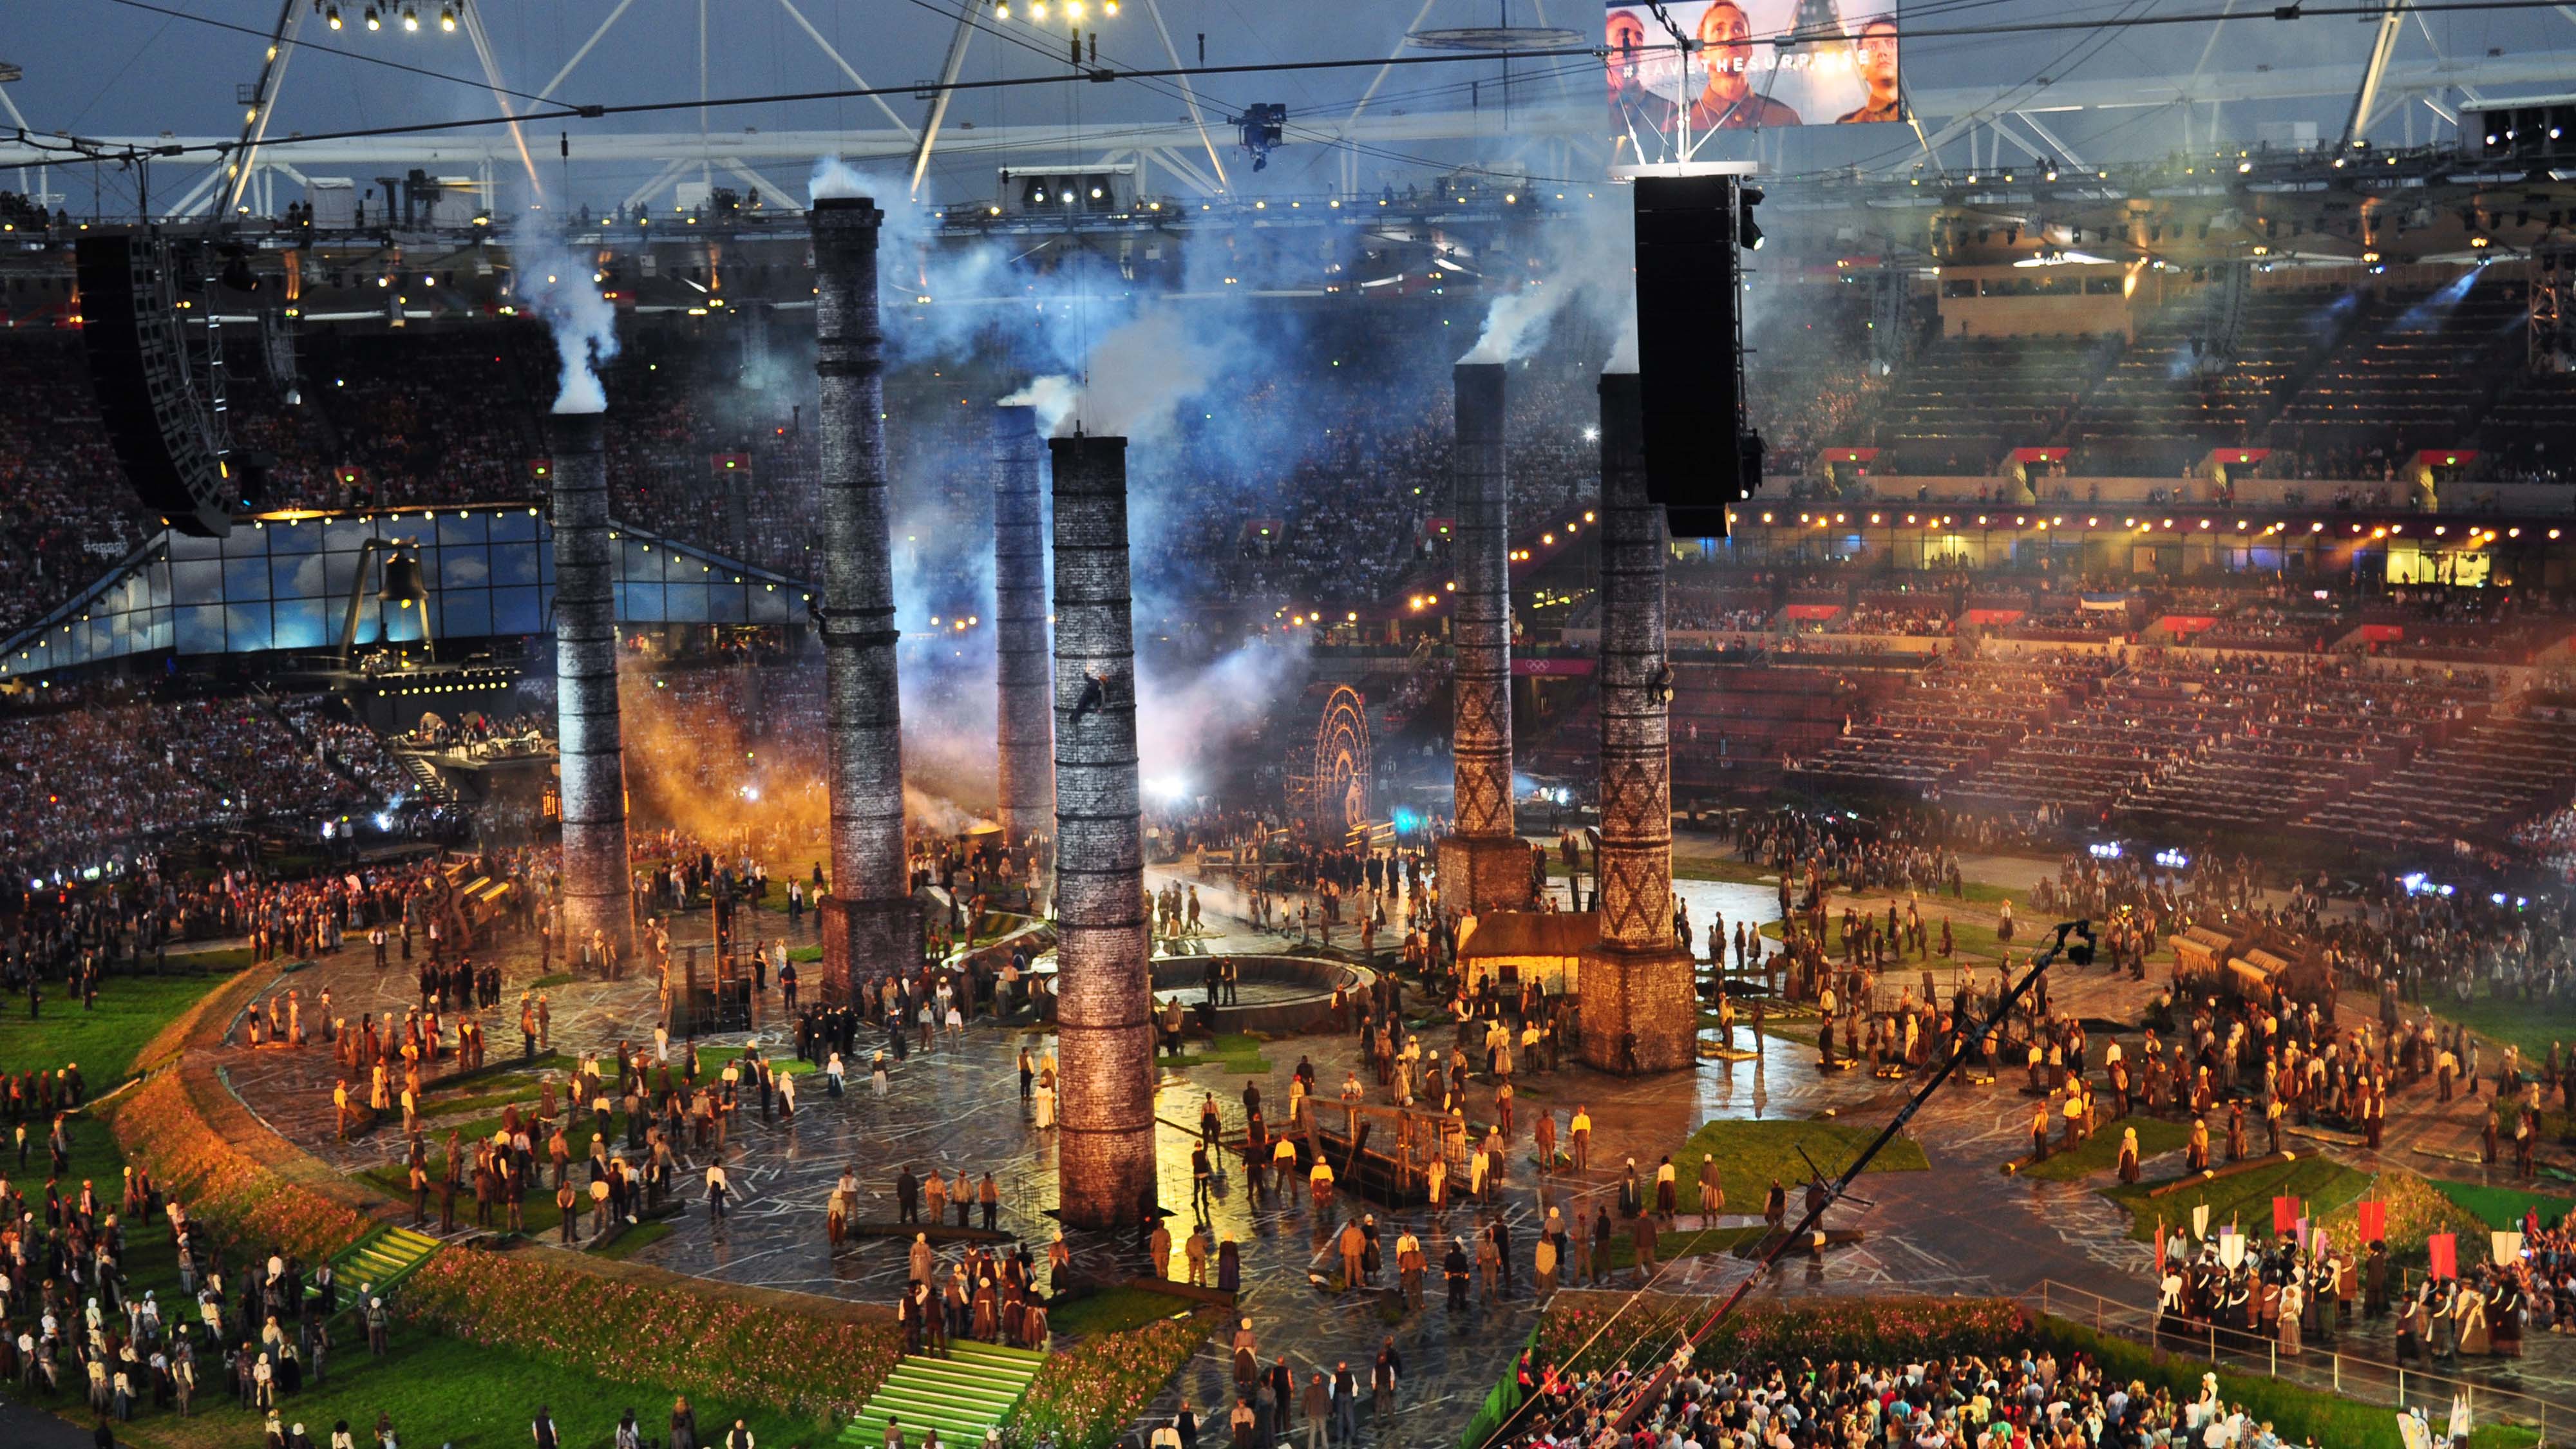 Giant industrial chimneys with smoke for London 2012 Olympic Games opening ceremony